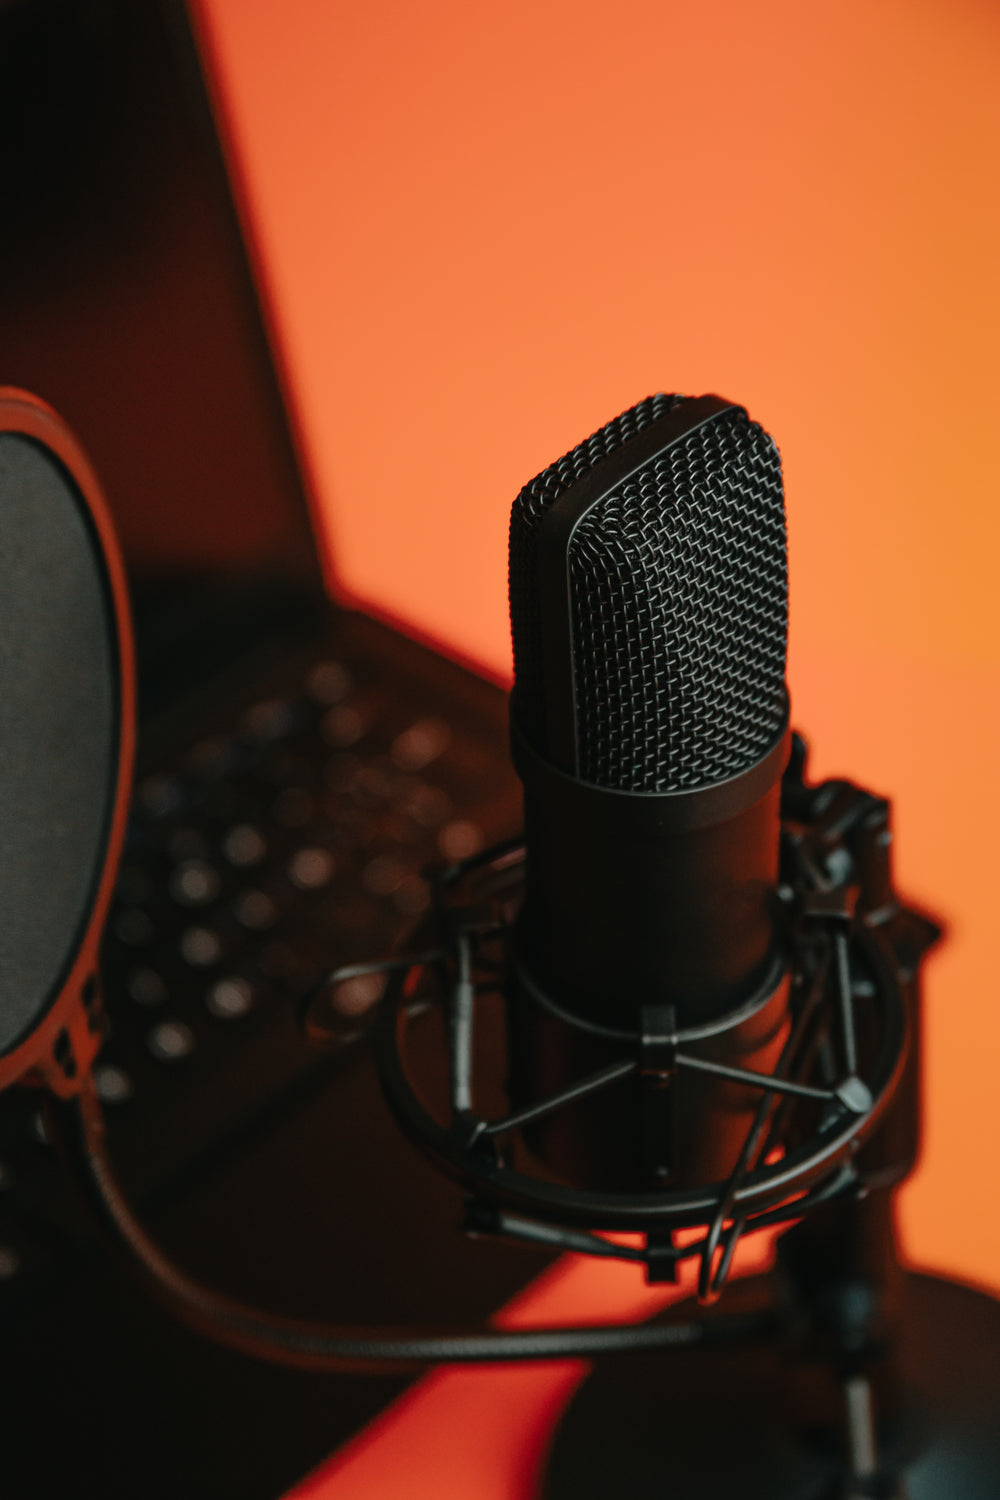 black microphone on a stand reflecting orange light